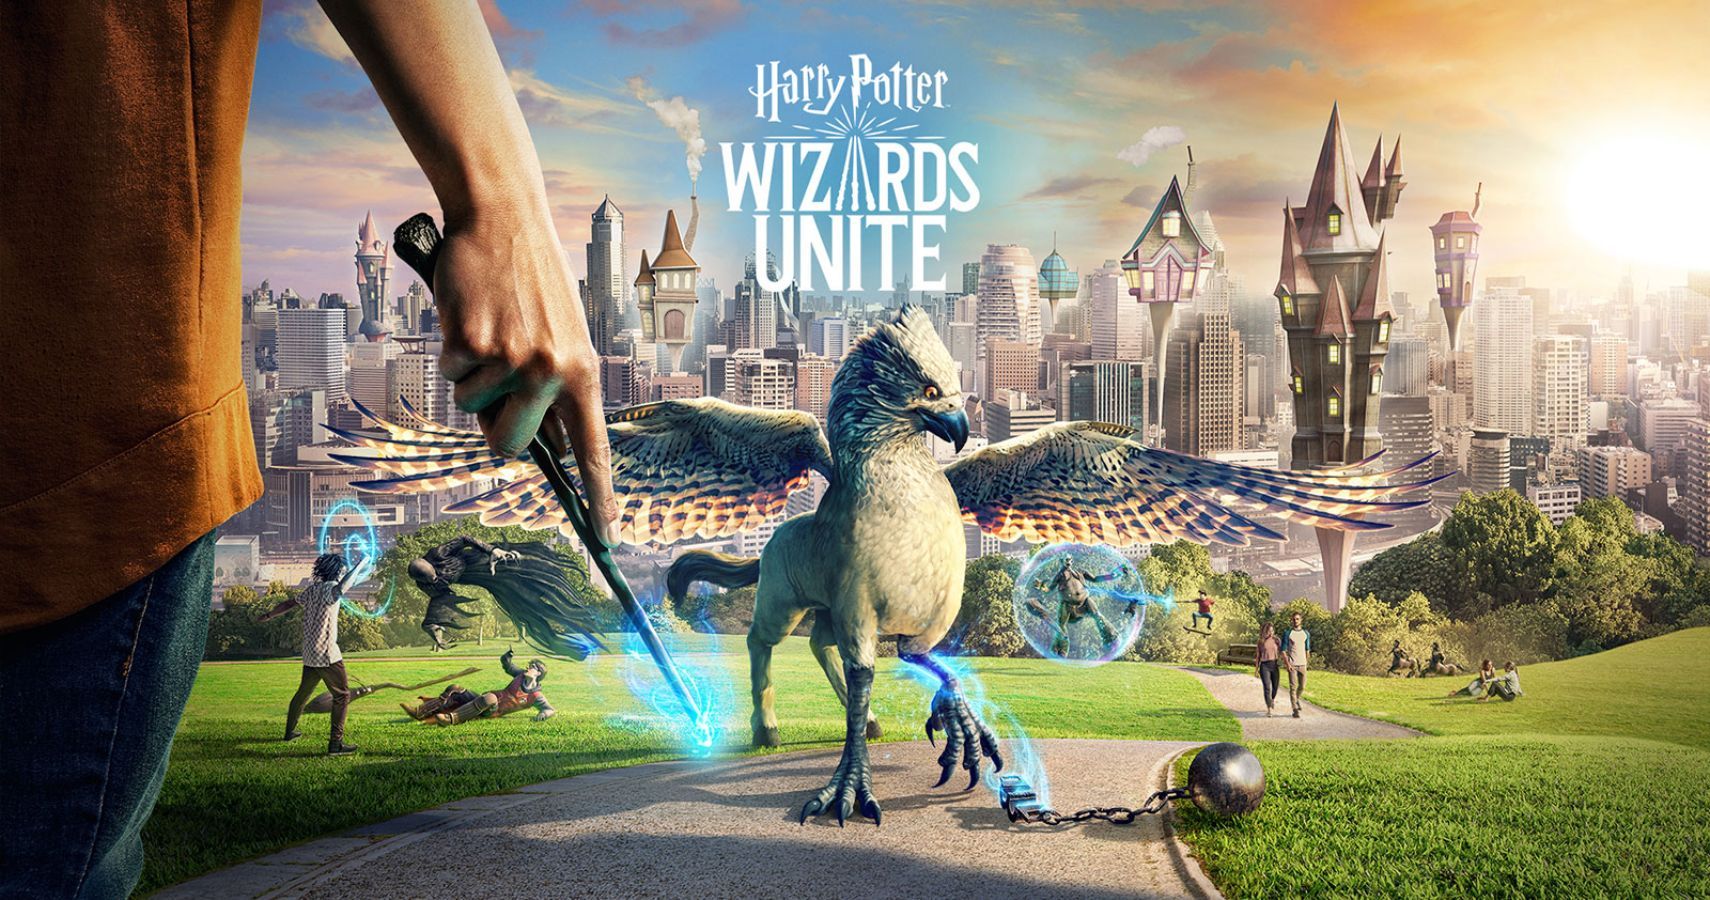 Harry Potter Wizards Unite Adds New Spells and Skill Trees